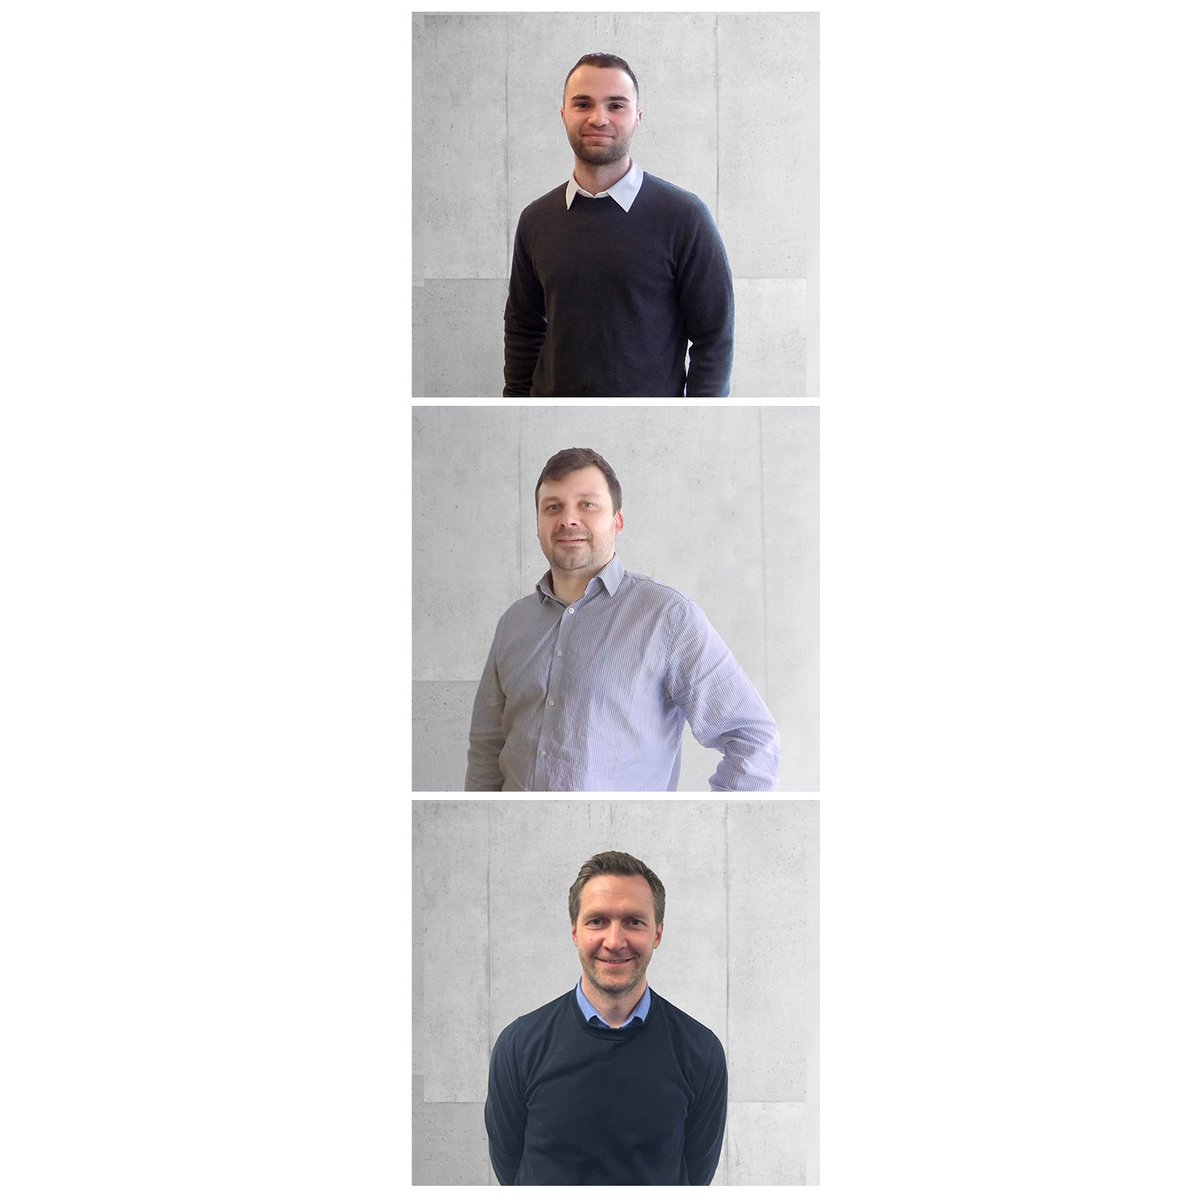 Meet the newest members of our team...

Project engineers Adam Jazzar and Jack O’Connell have joined us in London, while Matt Cox settled into our Cambridge office as a senior technician.

Welcome to Peter Dann!

#peterdann #consultingengineers #newstarters #structuralengineers